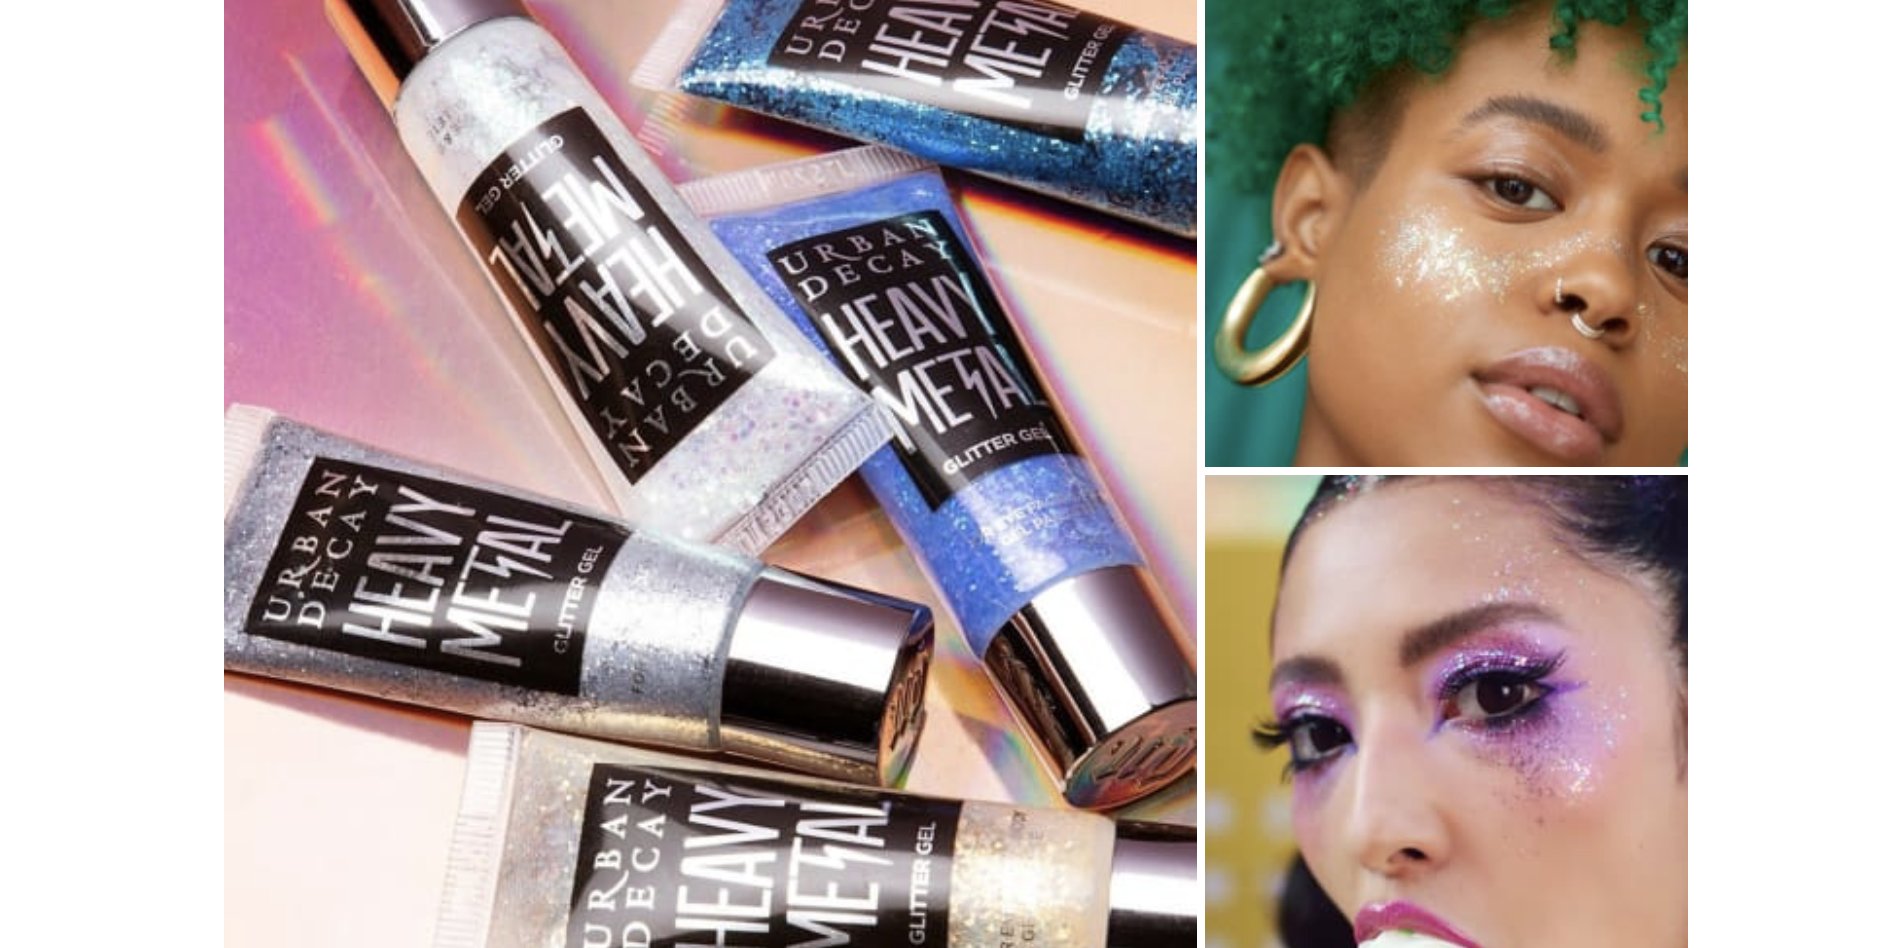 screen shot 2019 07 01 at 2 35 42 am e1561916275235.png?resize=412,275 - 23 Beauty Products That Will Freshen Up Your Look And Day